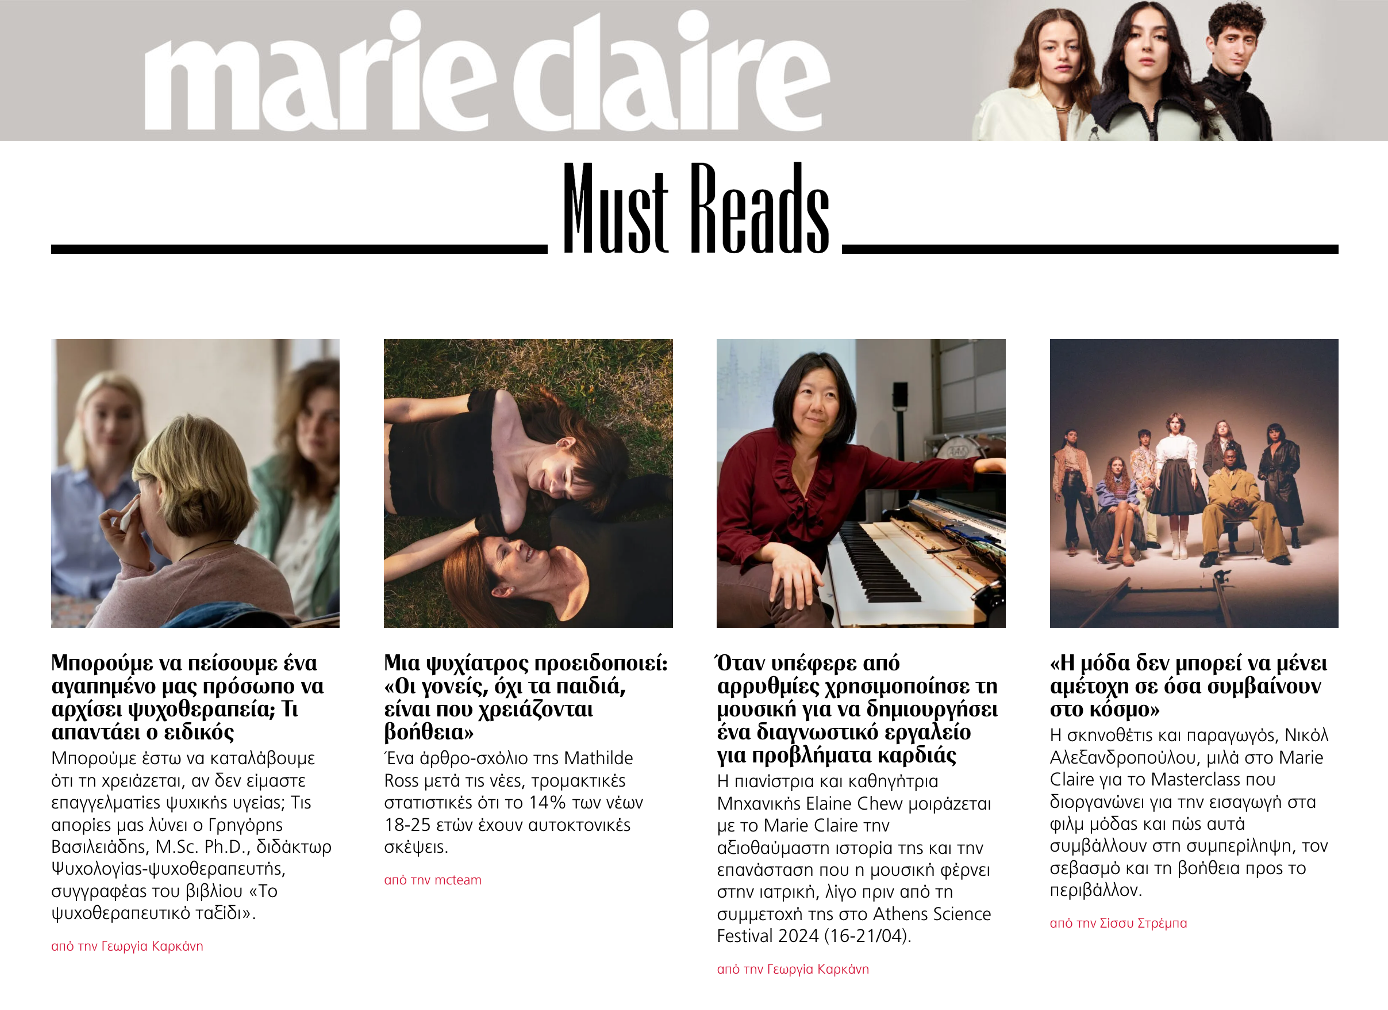 Marie Claire Greece: Anticipating Athens Science Festival